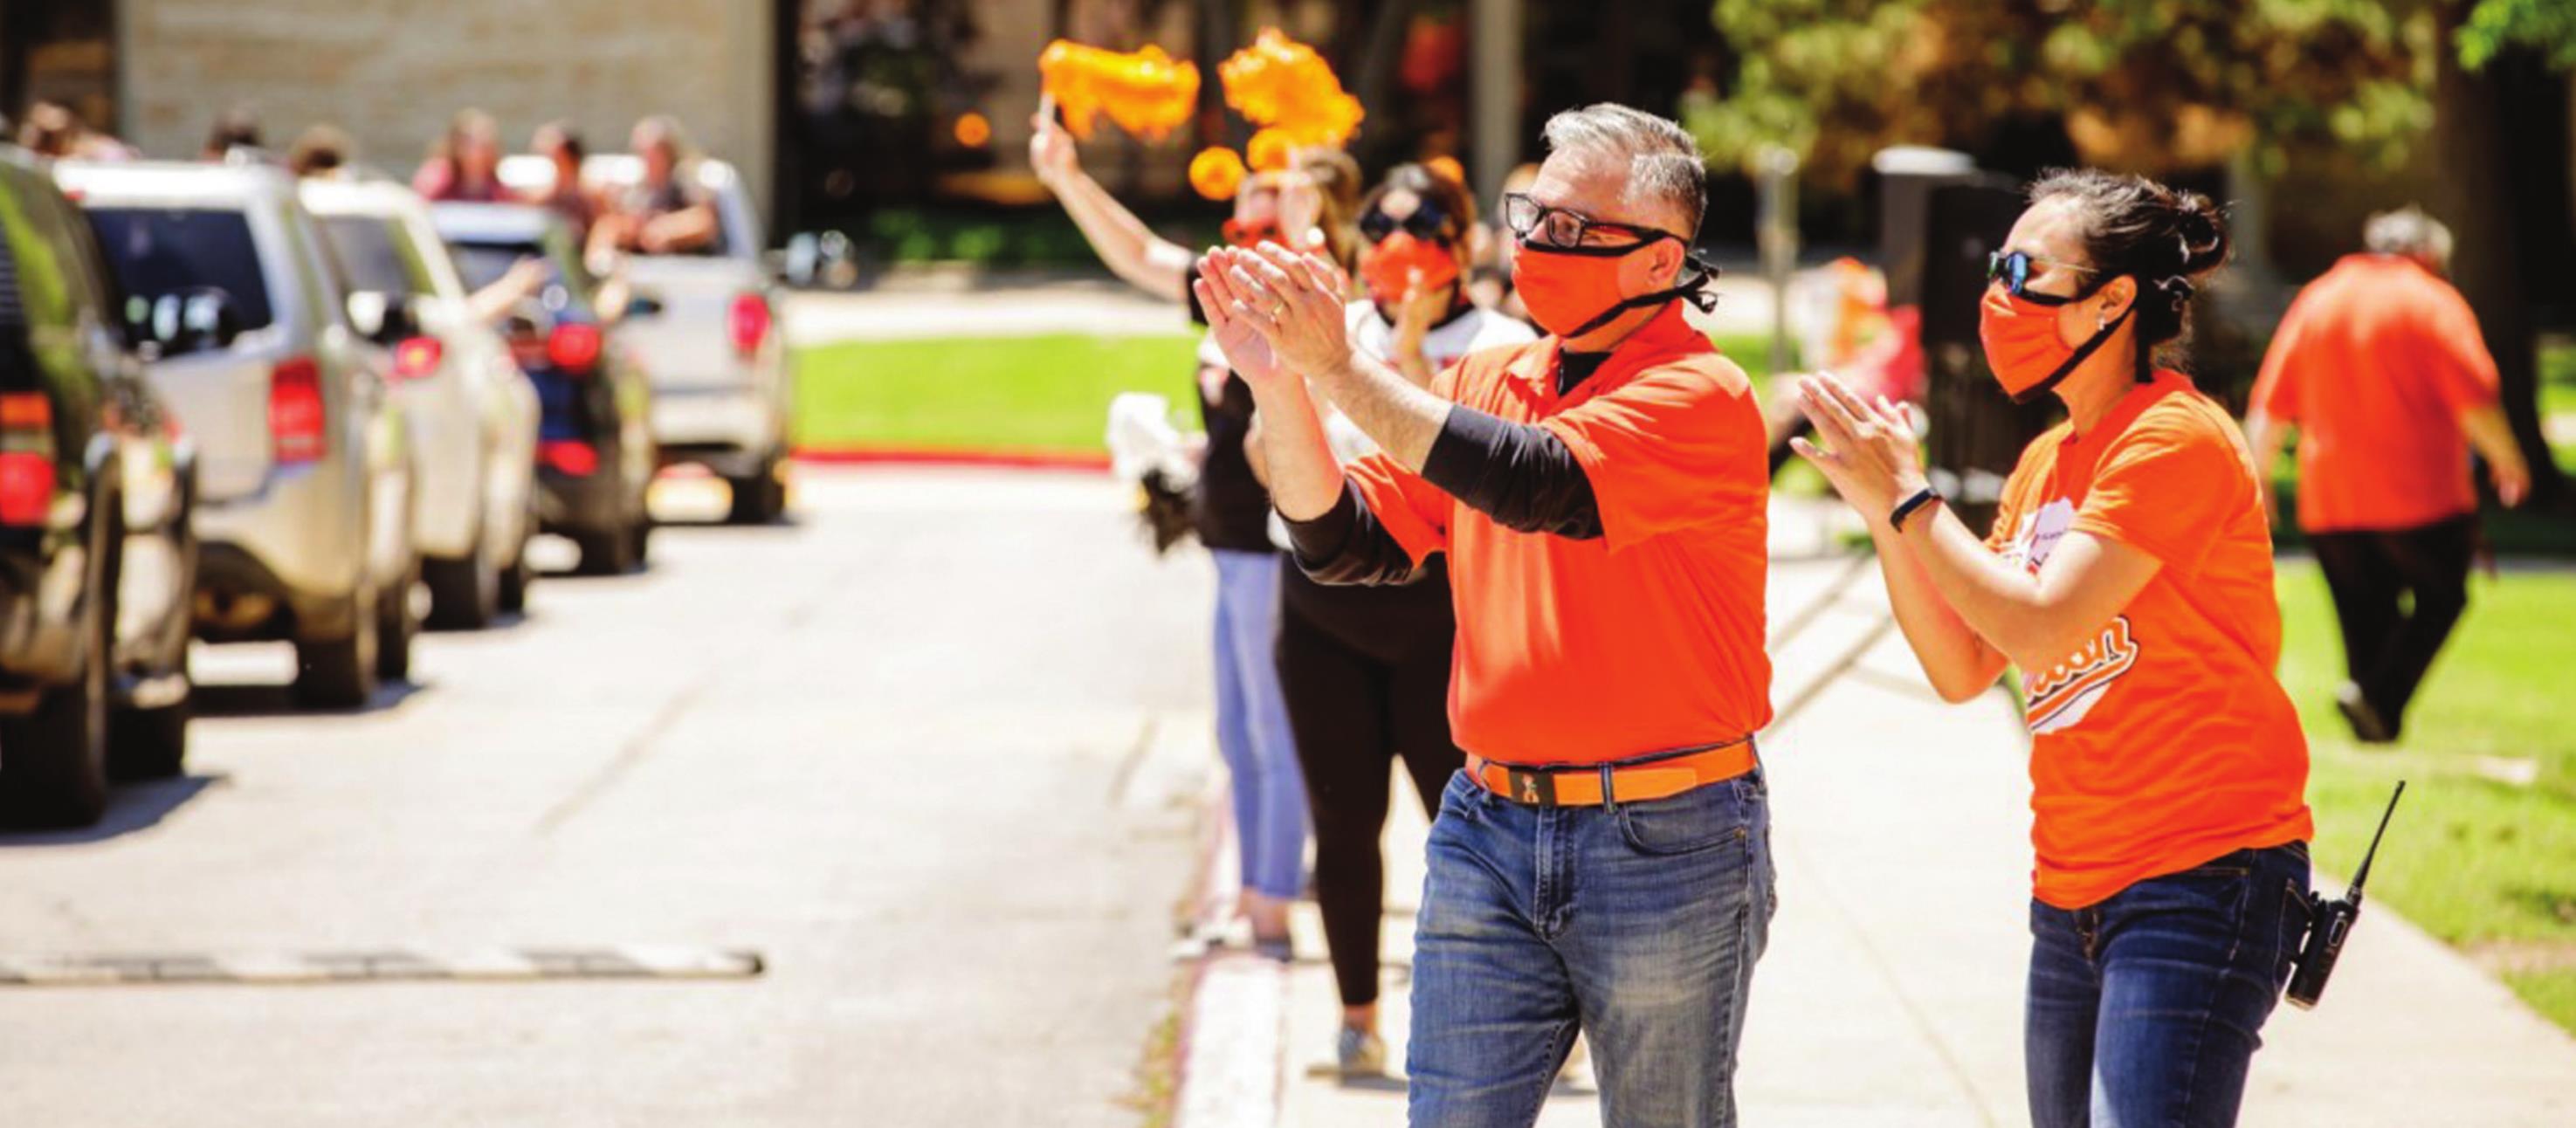 Oklahoma State University-Oklahoma City faculty and staff cheer students May 17 during a drive-through graduation celebration that replaced the traditional ceremony that could not be held because of COVID-19. Provided